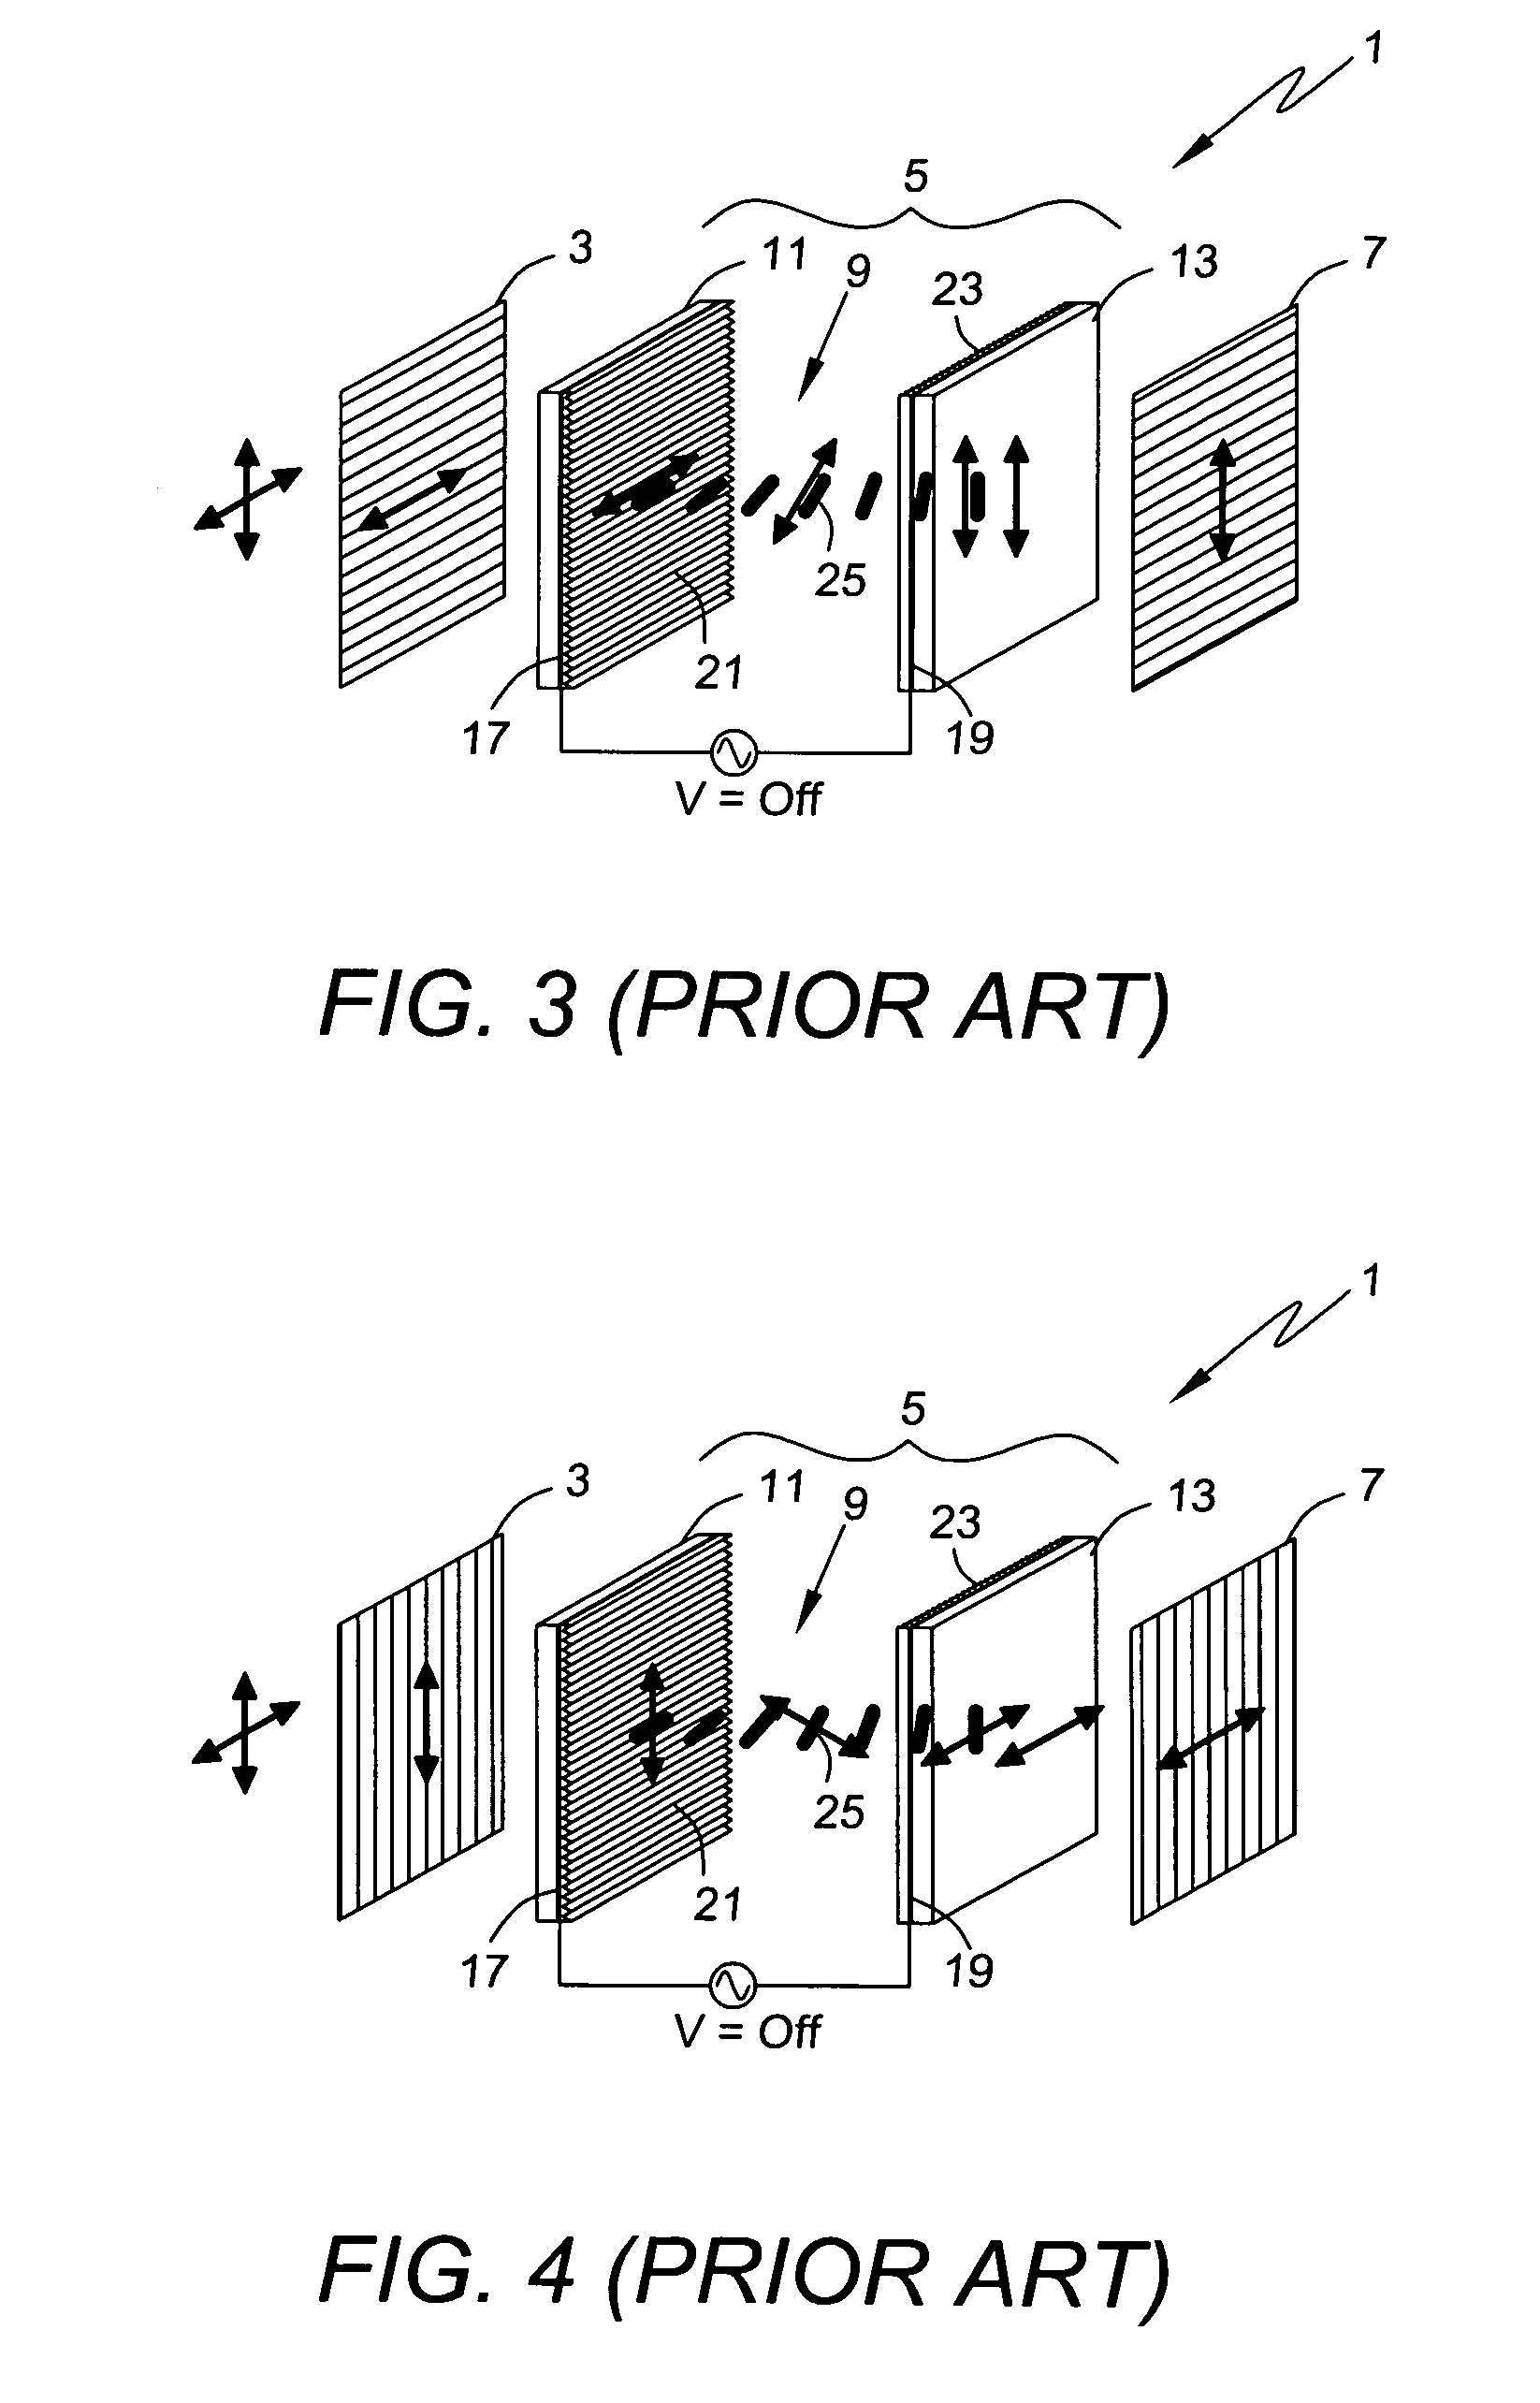 LCD-based confidential viewing apparatus utilizing auto-inversion masking